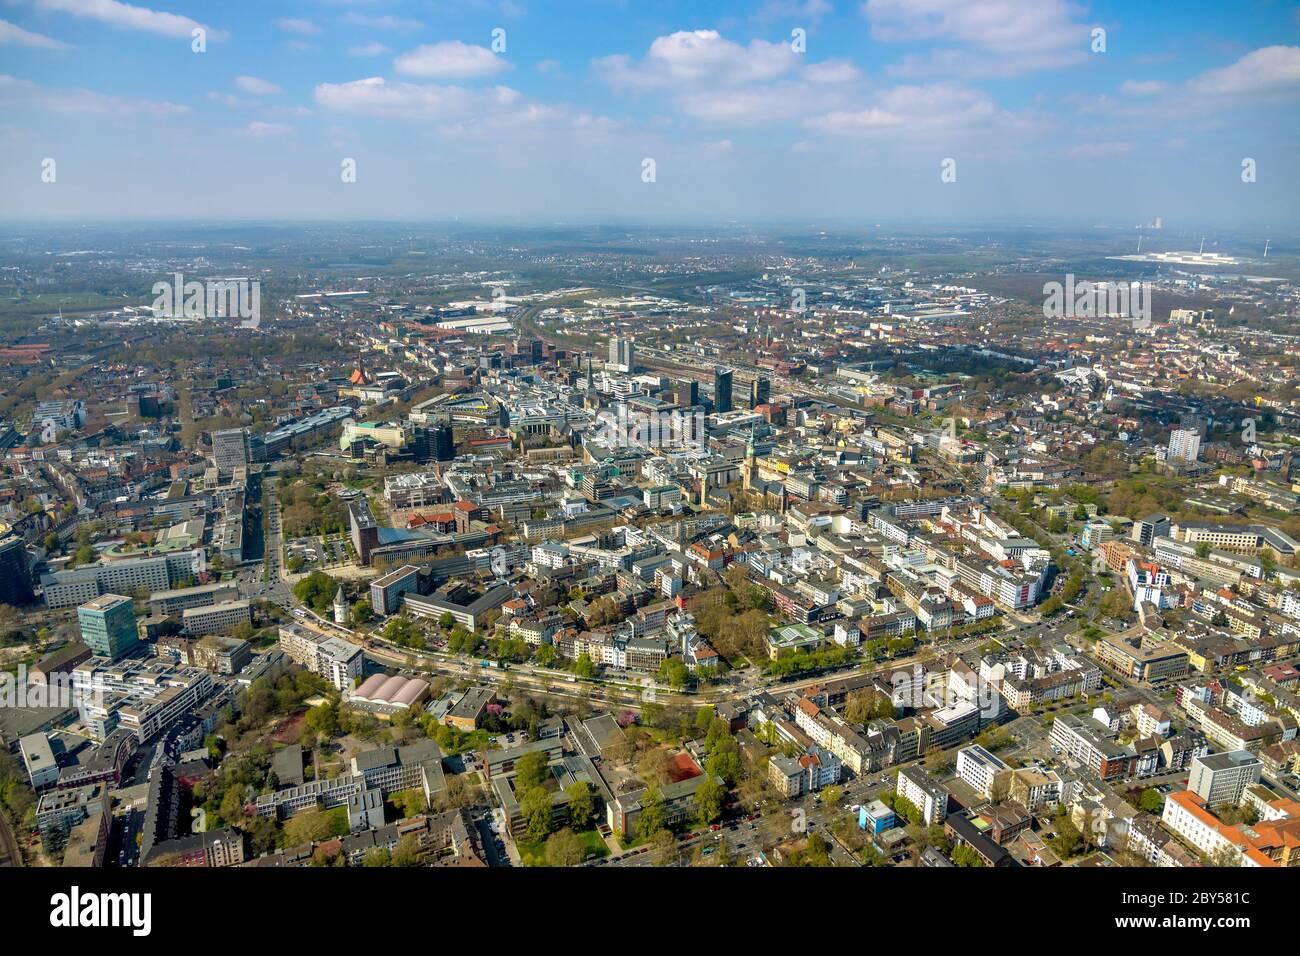 inner city of Dortmund seen from the east, 10.04.2020, aerial view, Germany, North Rhine-Westphalia, Ruhr Area, Dortmund Stock Photo